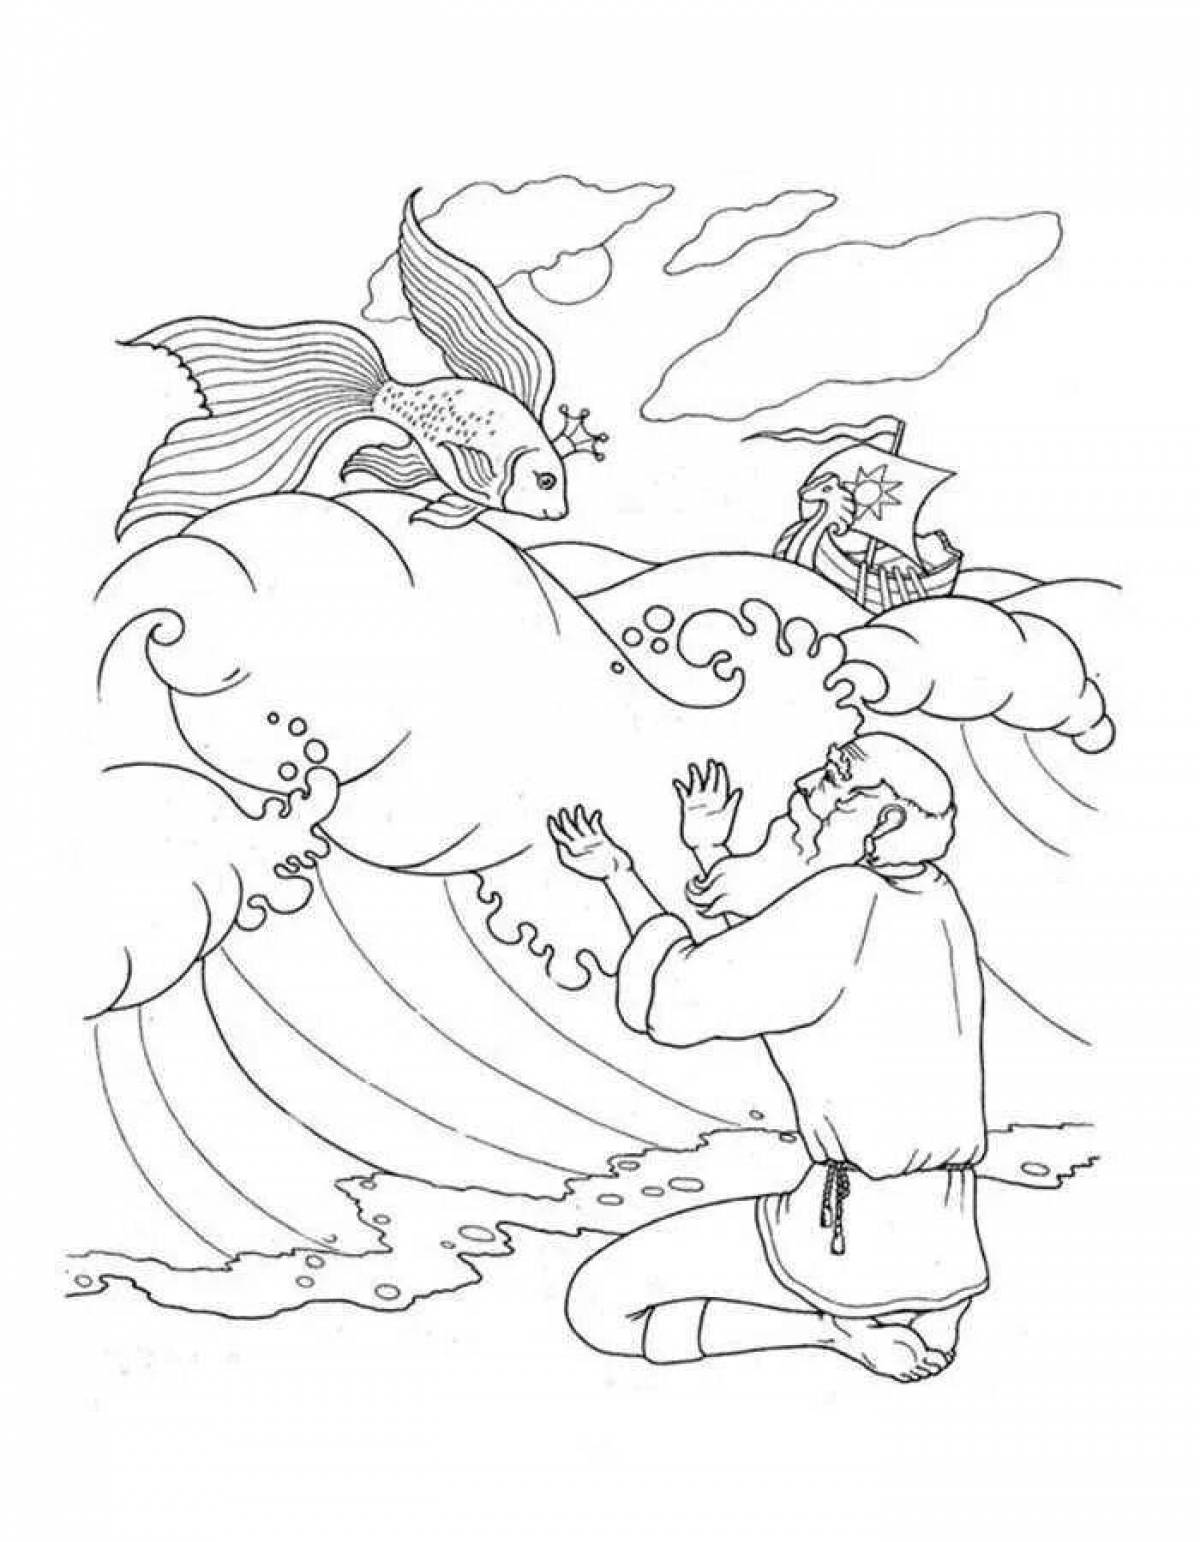 Coloring book based on Pushkin's fairy tales for preschoolers